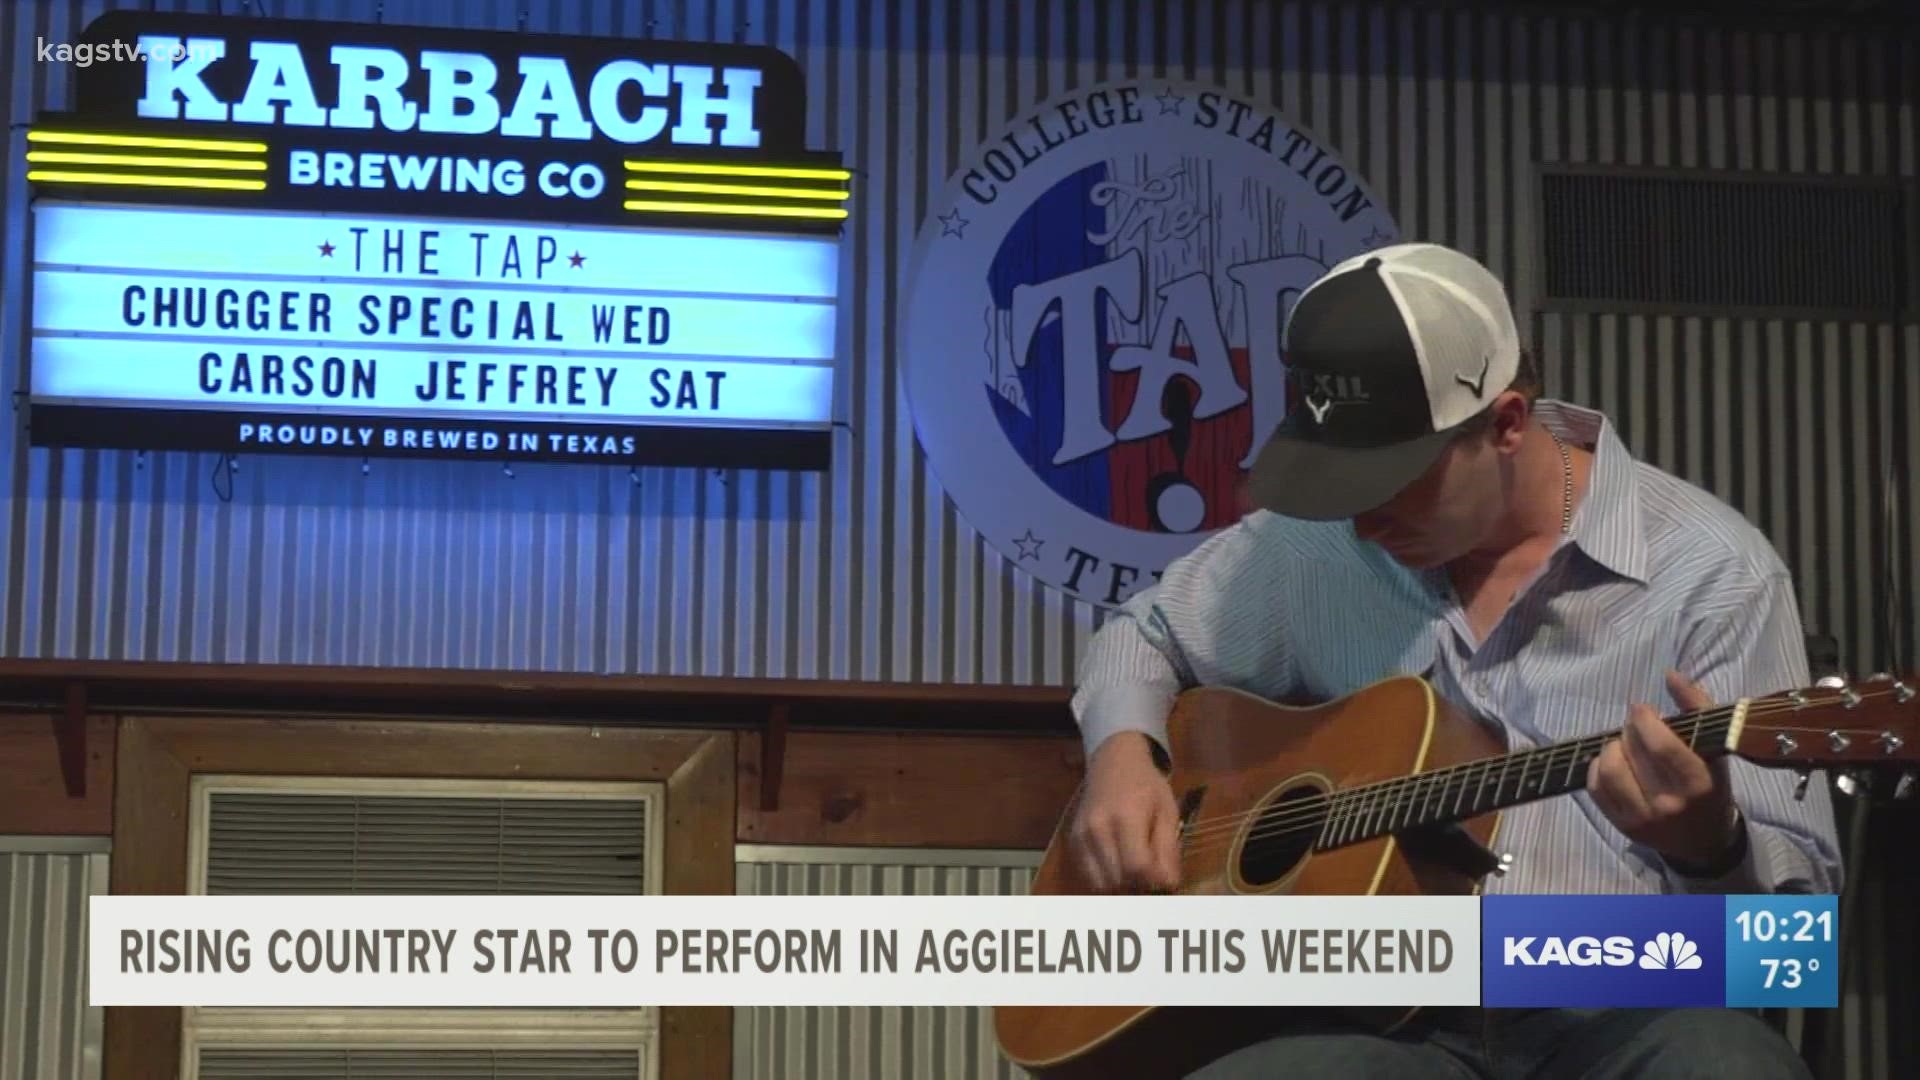 Carson Jeffrey, TAMU class of ’20, set to perform at The Tap in College Station Saturday.